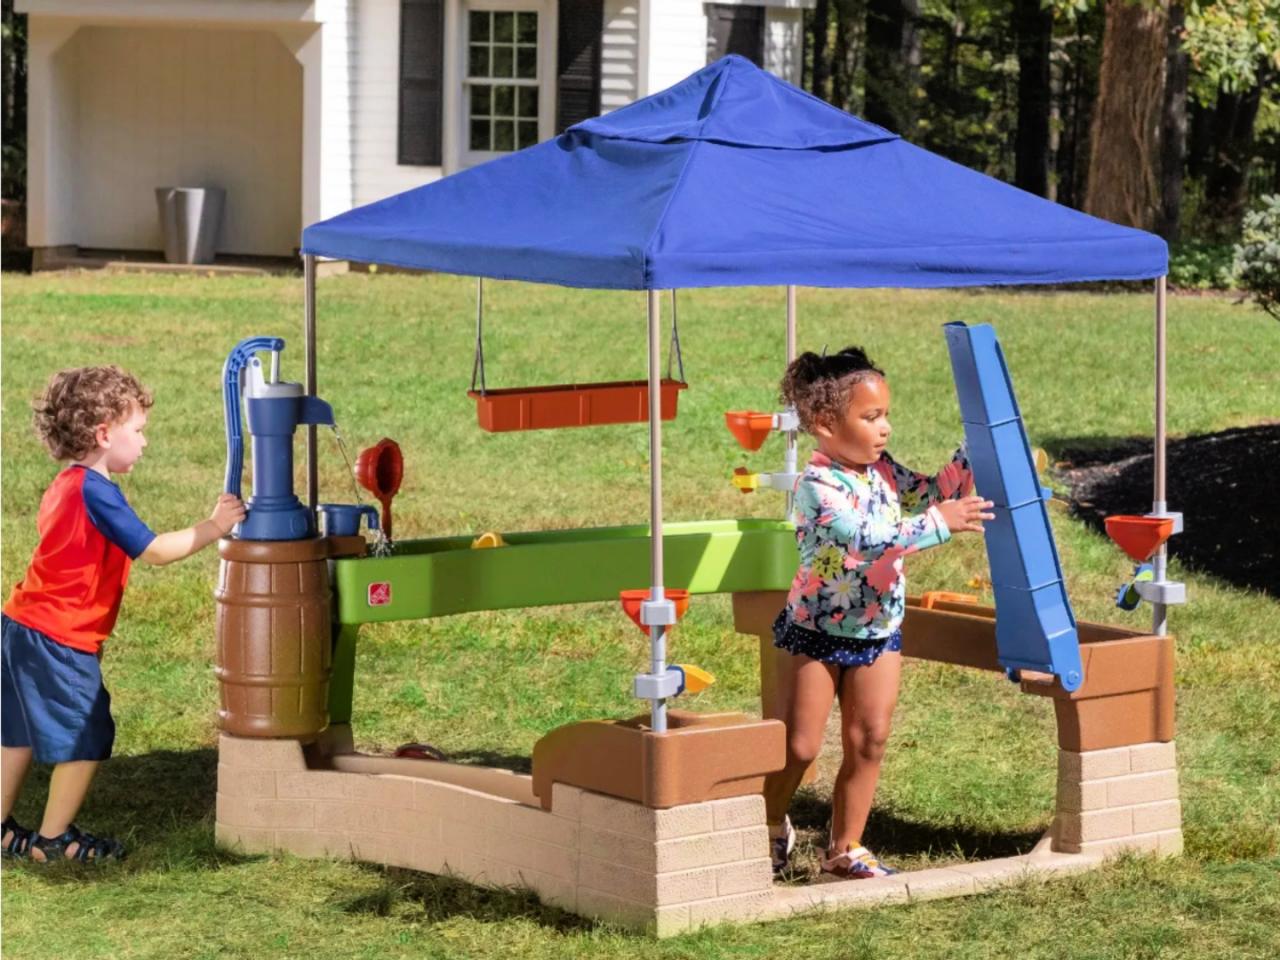 These Outdoor Water Tables for Toddlers Are Perfect for Summertime Fun